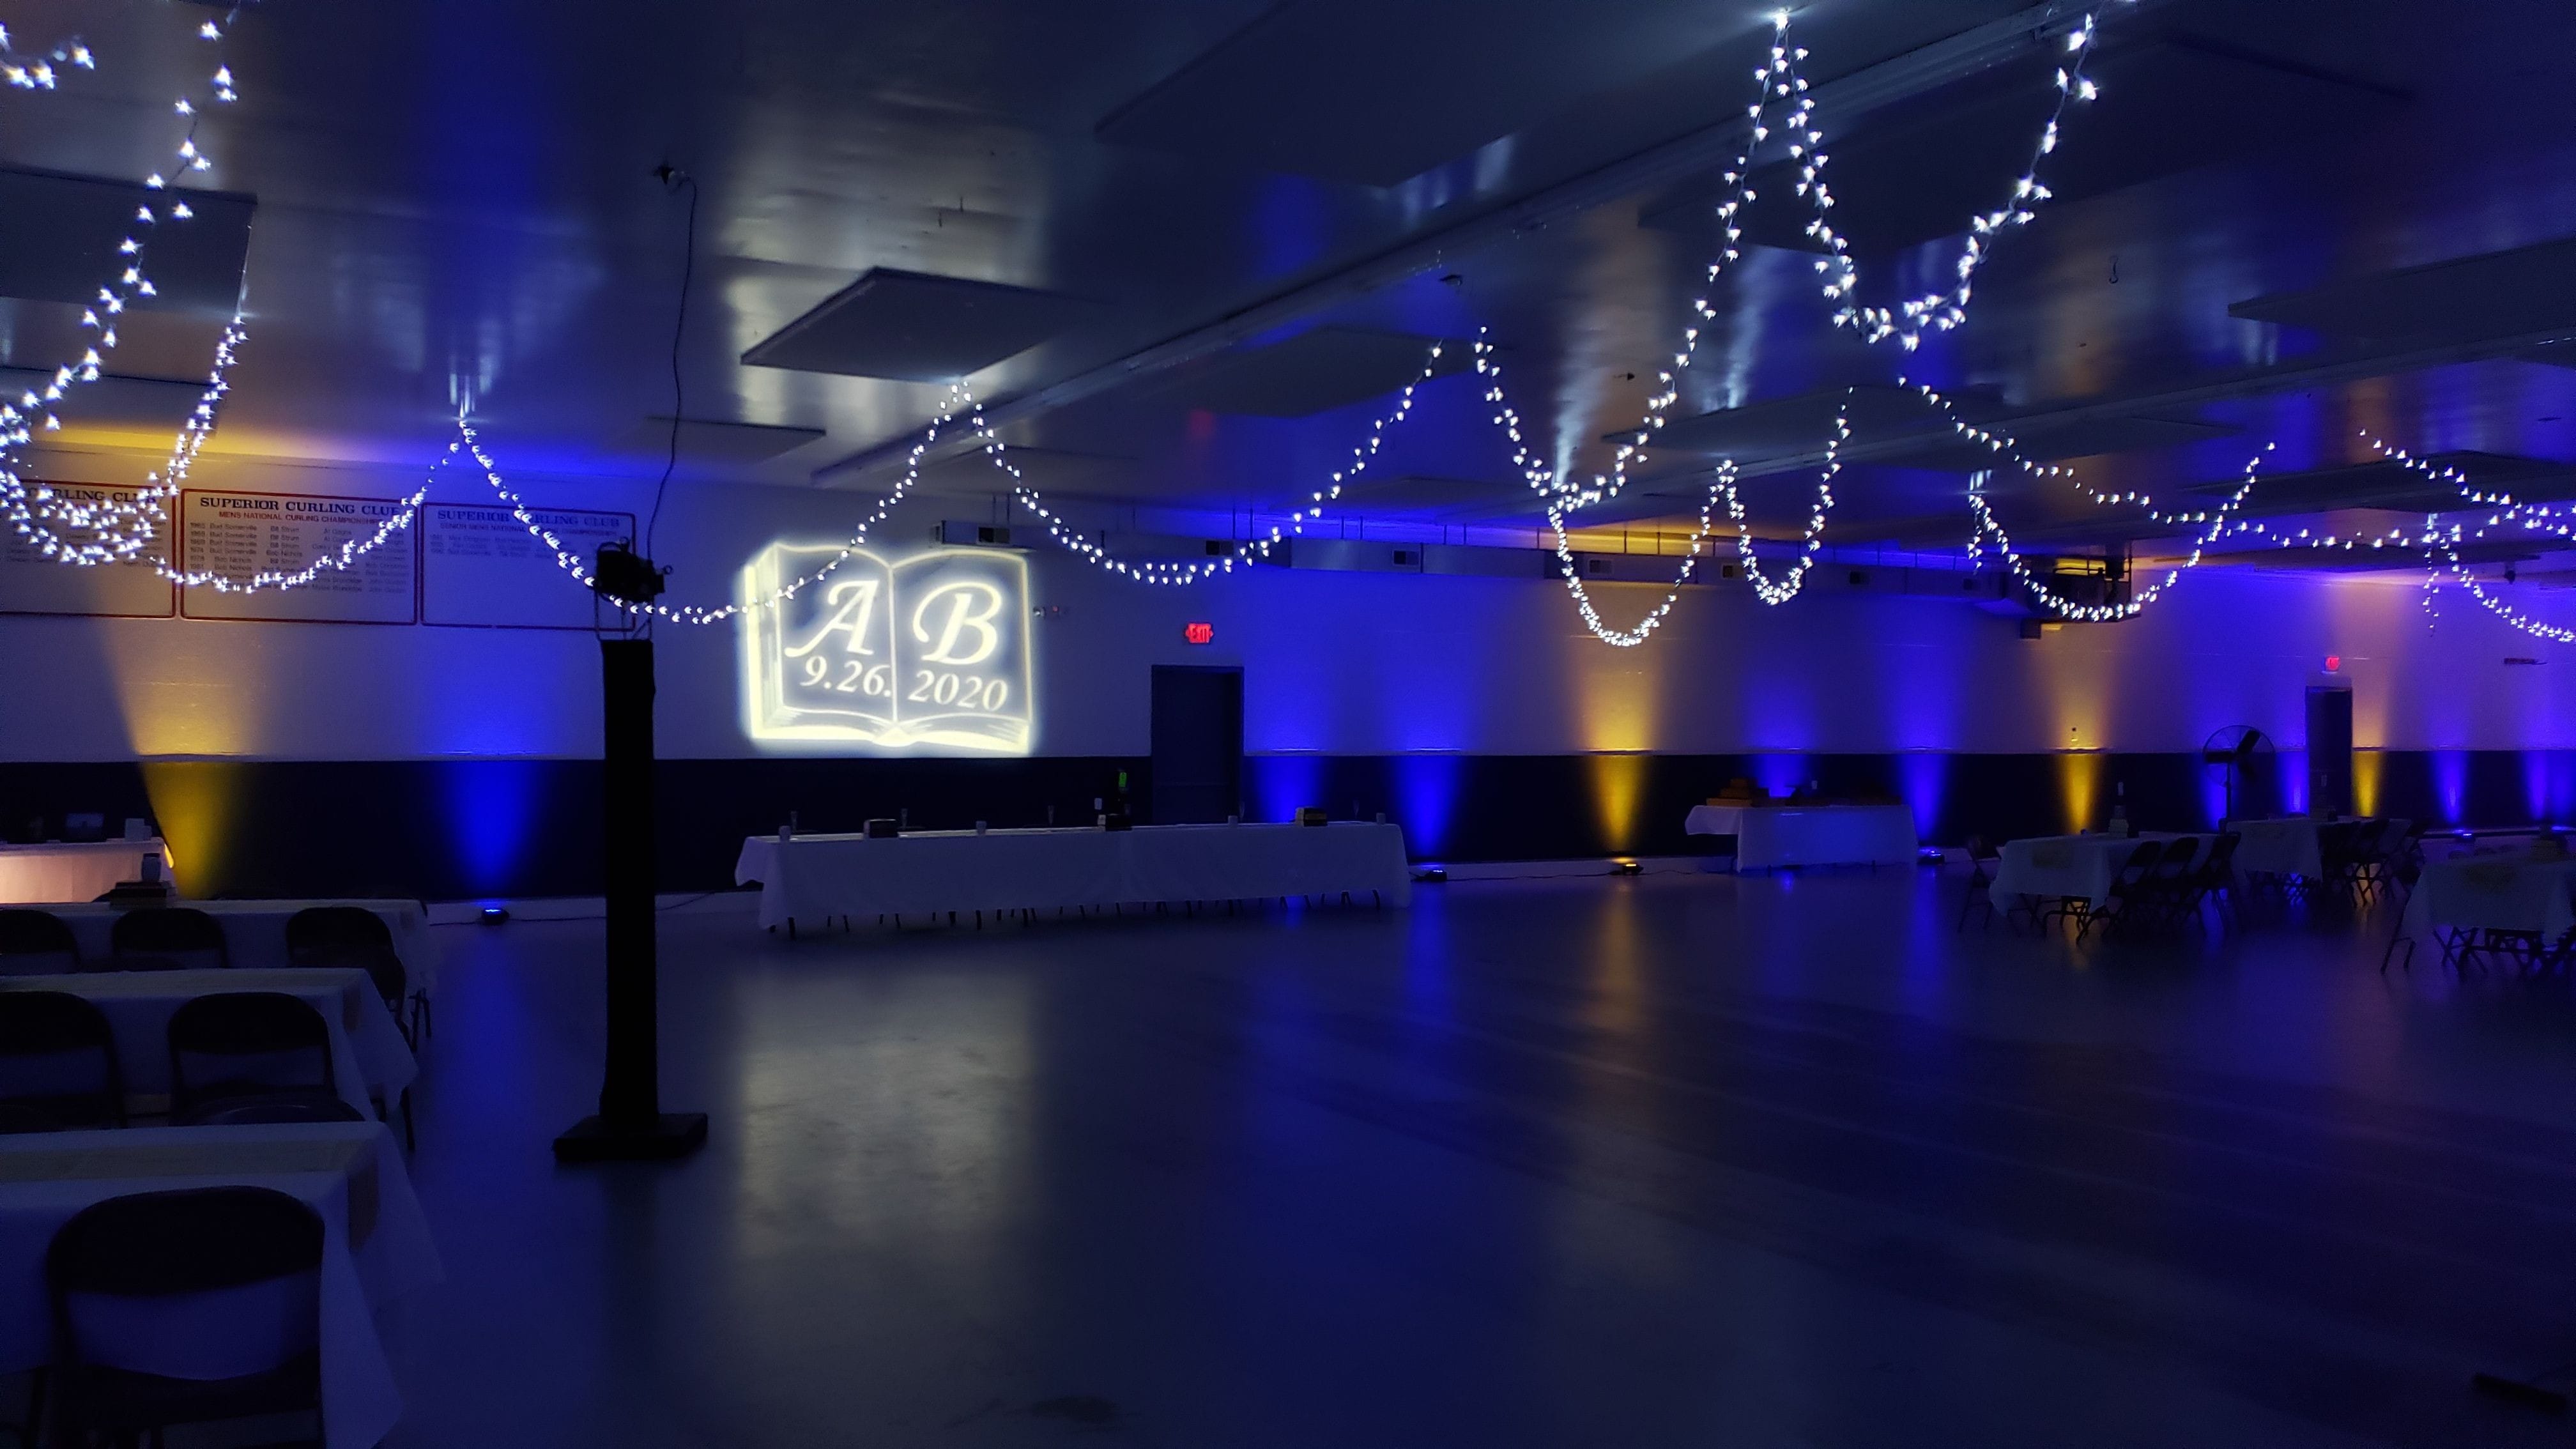 A storybook wedding lighting at the Superior Curling Club. Up lighting in blue and yellow witha wedding monogram of initials in a book.